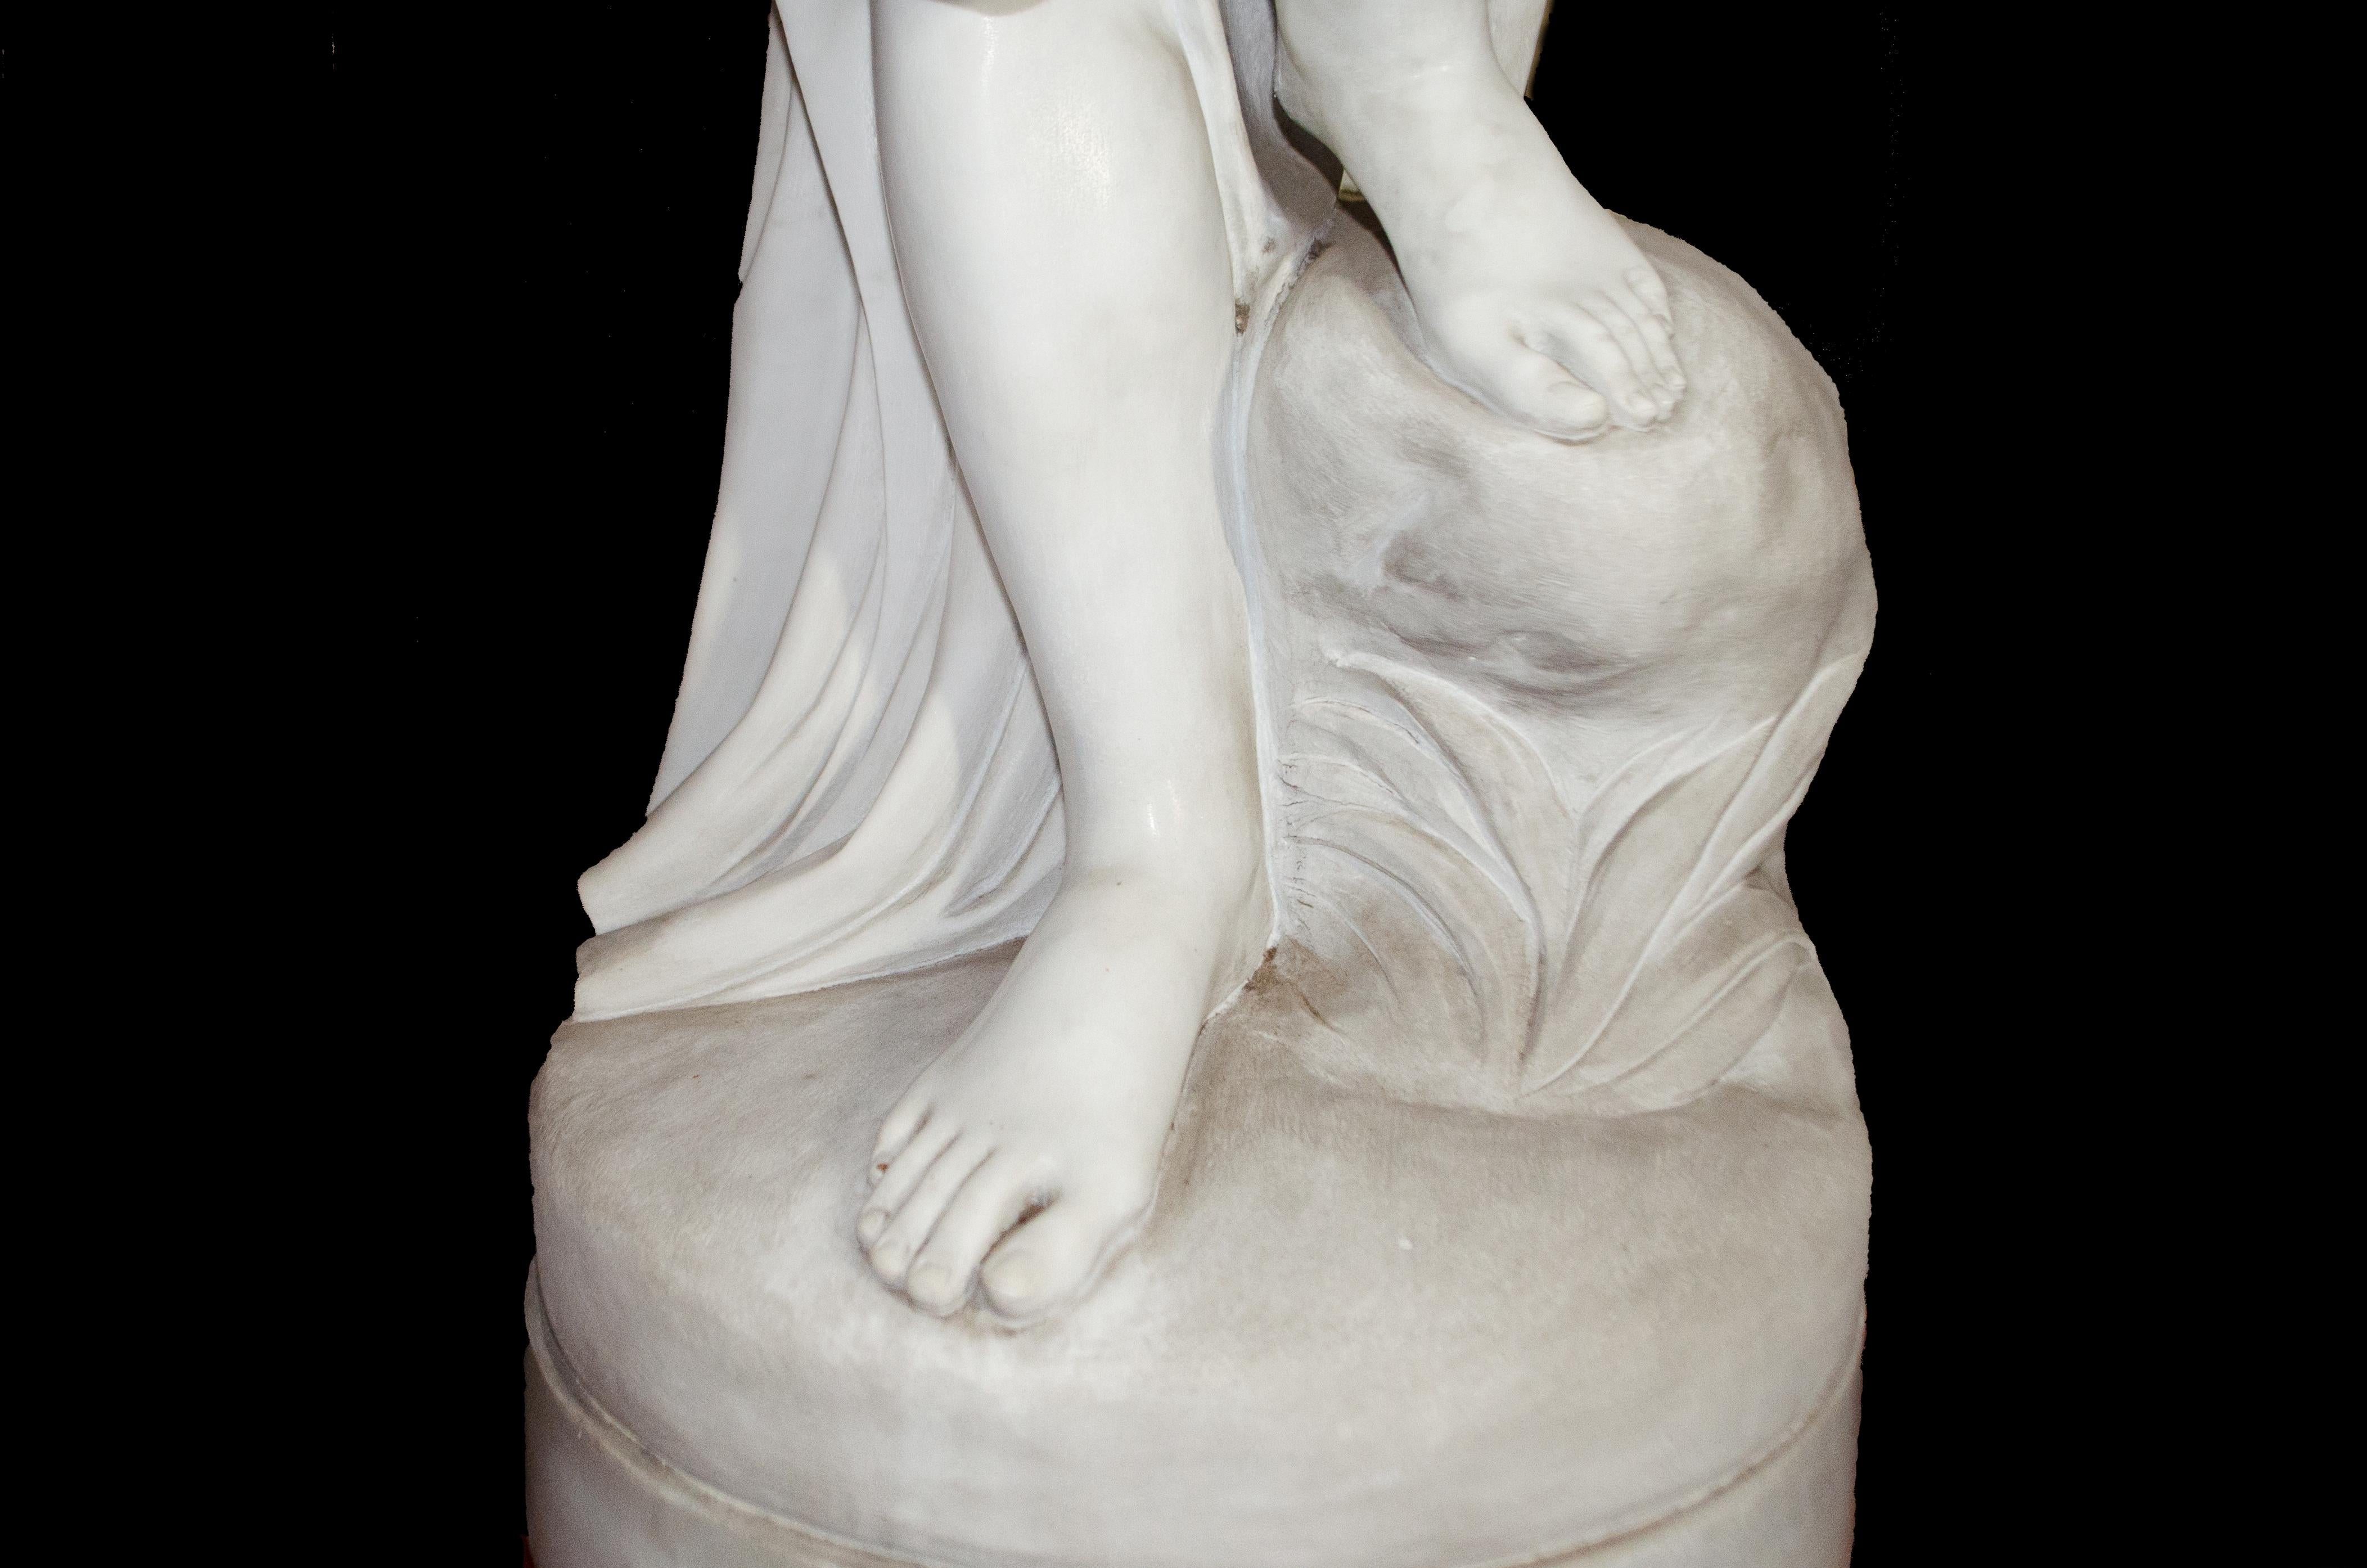  Fabulous Neoclassical Marble Sculpture of Bathing Venus 1880' For Sale 5